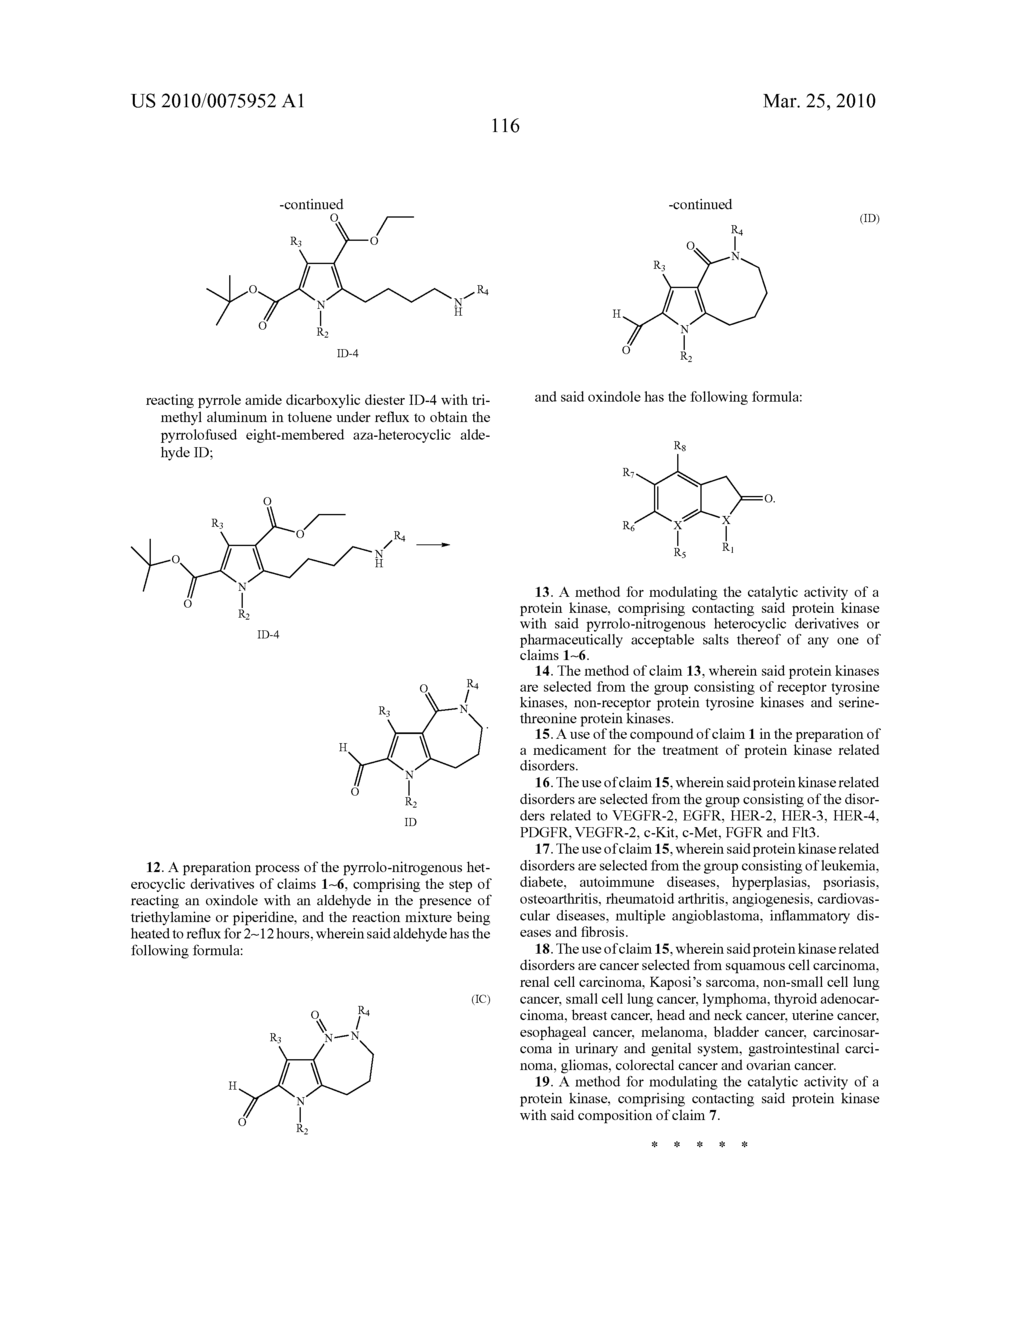 PYRROLO-NITROGENOUS HETEROCYCLIC DERIVATIES,THE PREPARATION AND THE PHARMCETICAL USE THEEOF - diagram, schematic, and image 117